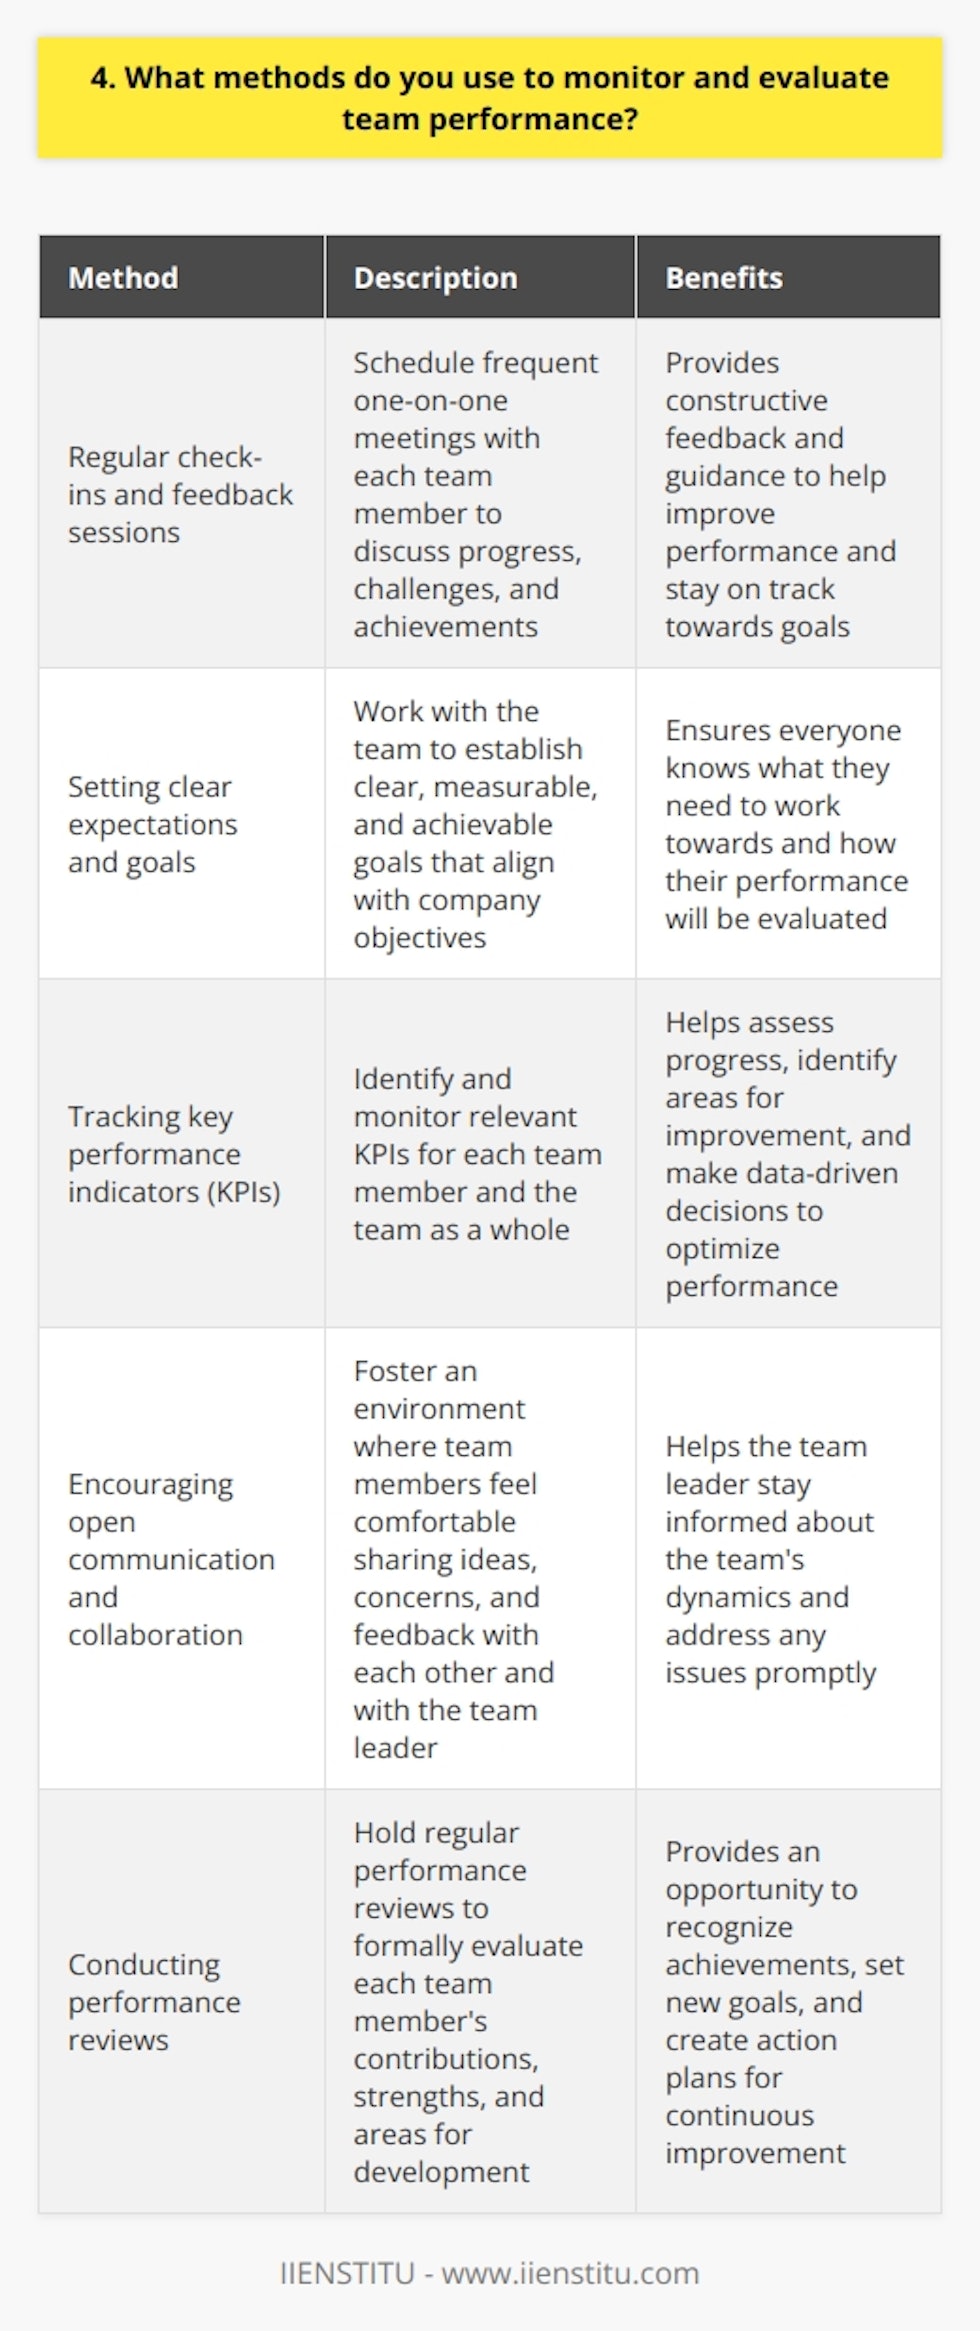 As a team leader, I employ several methods to monitor and evaluate team performance effectively. These include: Regular check-ins and feedback sessions I schedule frequent one-on-one meetings with each team member to discuss their progress, challenges, and achievements. During these sessions, I provide constructive feedback and guidance to help them improve their performance and stay on track towards their goals. Setting clear expectations and goals I work with my team to establish clear, measurable, and achievable goals that align with the companys objectives. By setting these expectations upfront, everyone knows what they need to work towards and how their performance will be evaluated. Tracking key performance indicators (KPIs) I identify and monitor relevant KPIs for each team member and the team as a whole. These metrics help me assess progress, identify areas for improvement, and make data-driven decisions to optimize performance. Encouraging open communication and collaboration I foster an environment where team members feel comfortable sharing ideas, concerns, and feedback with each other and with me. This open communication helps me stay informed about the teams dynamics and address any issues promptly. Conducting performance reviews I hold regular performance reviews to formally evaluate each team members contributions, strengths, and areas for development. These reviews provide an opportunity to recognize achievements, set new goals, and create action plans for continuous improvement. By using these methods consistently, I can effectively monitor and evaluate team performance, ensuring that we work together to achieve our goals and drive the companys success.